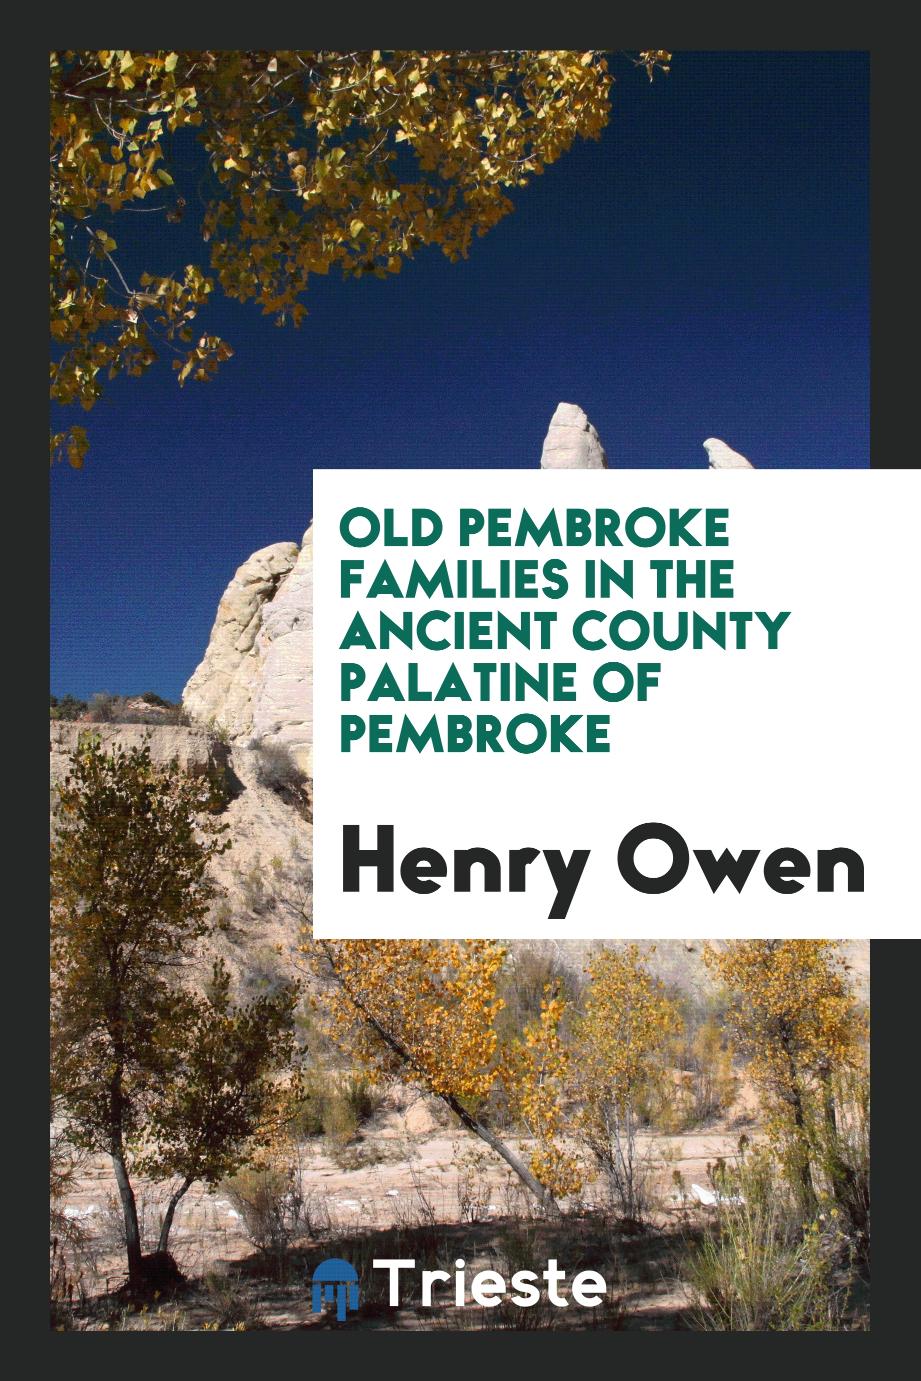 Old Pembroke families in the ancient county palatine of Pembroke